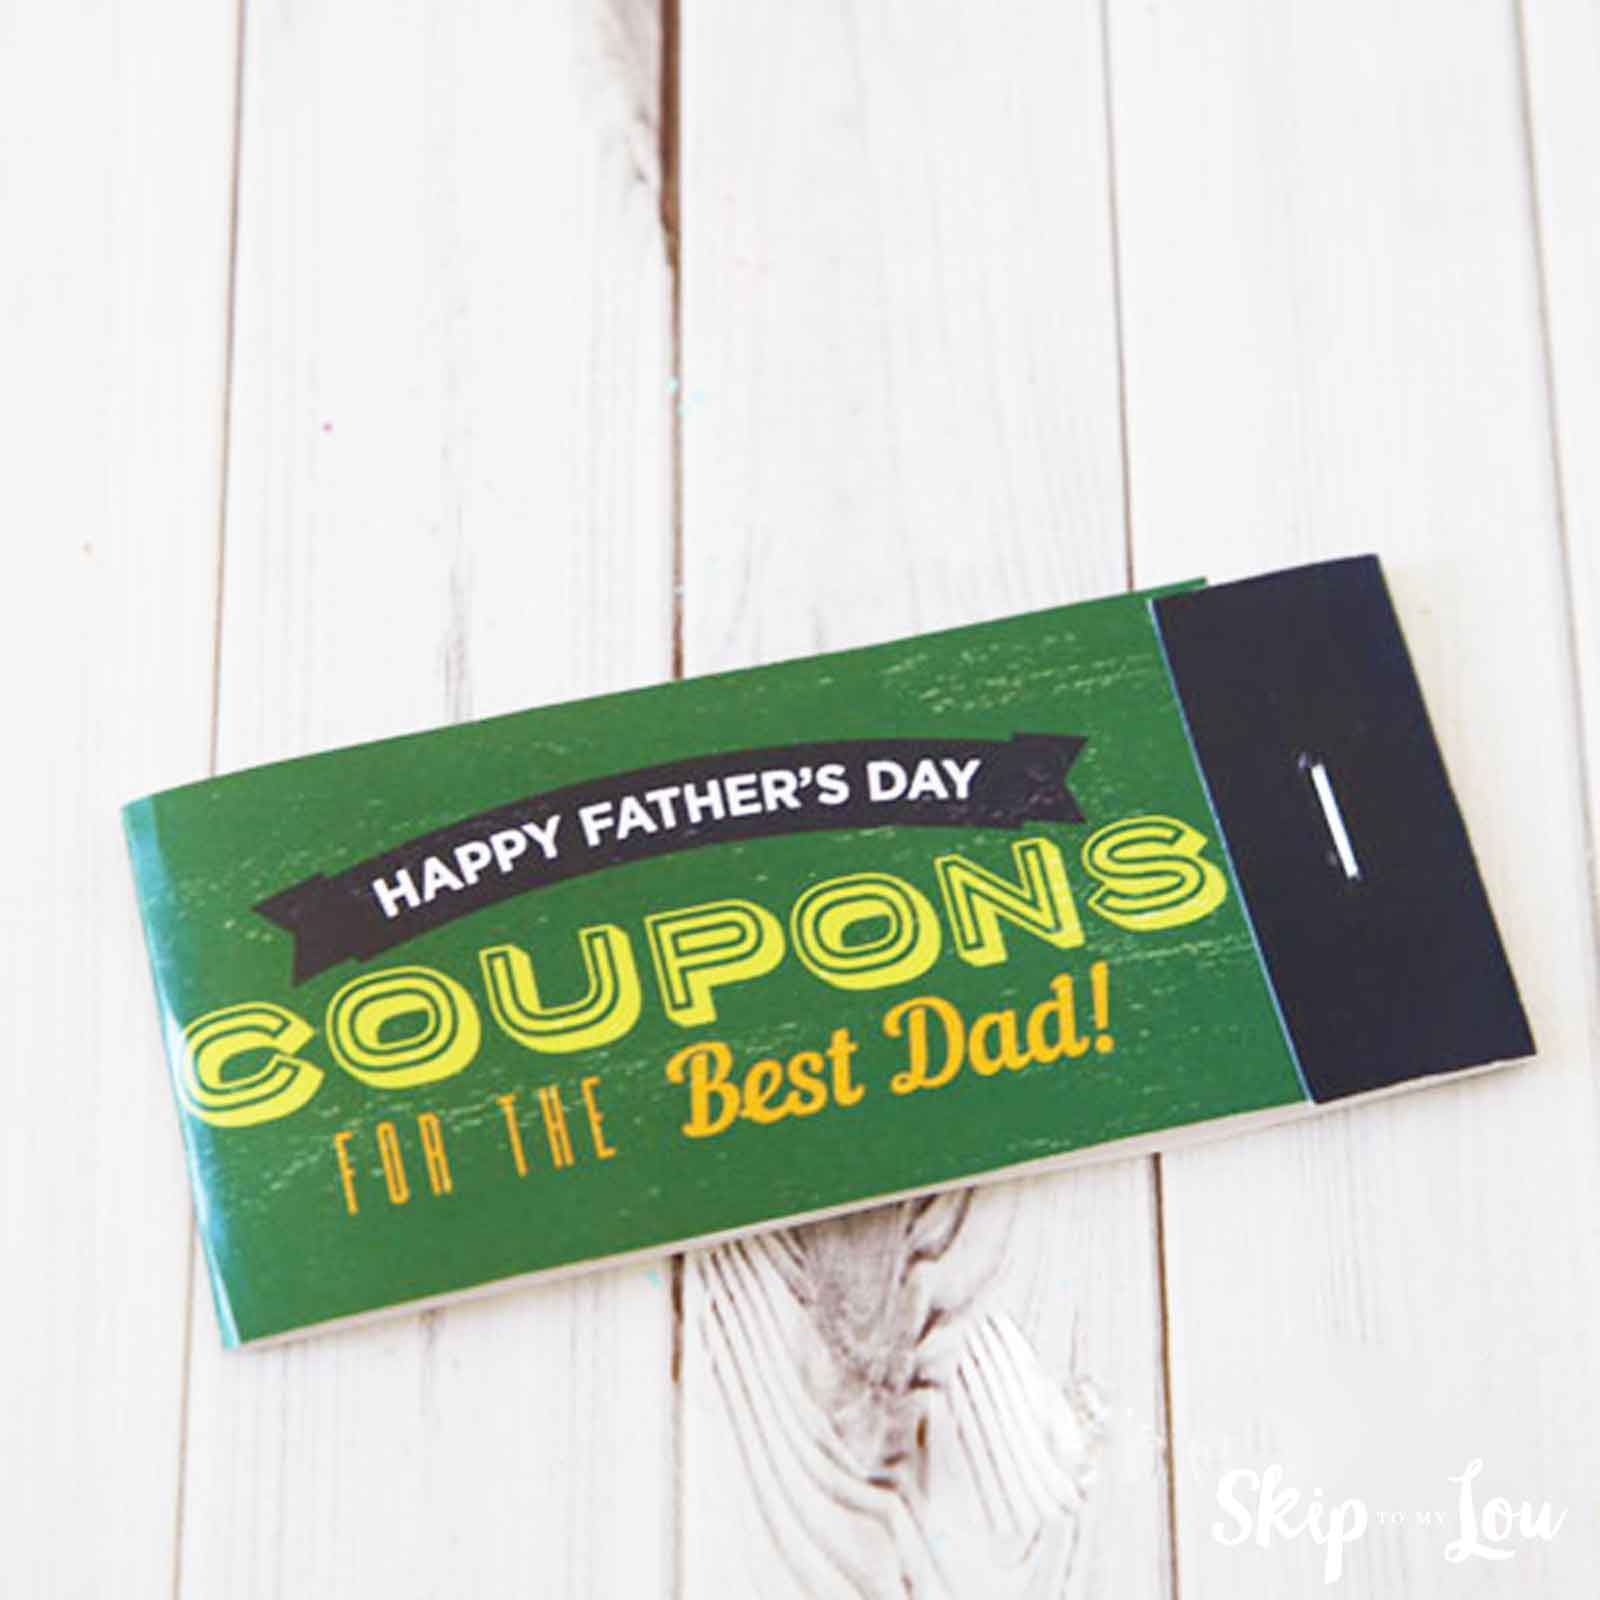  Father's Day Coupons